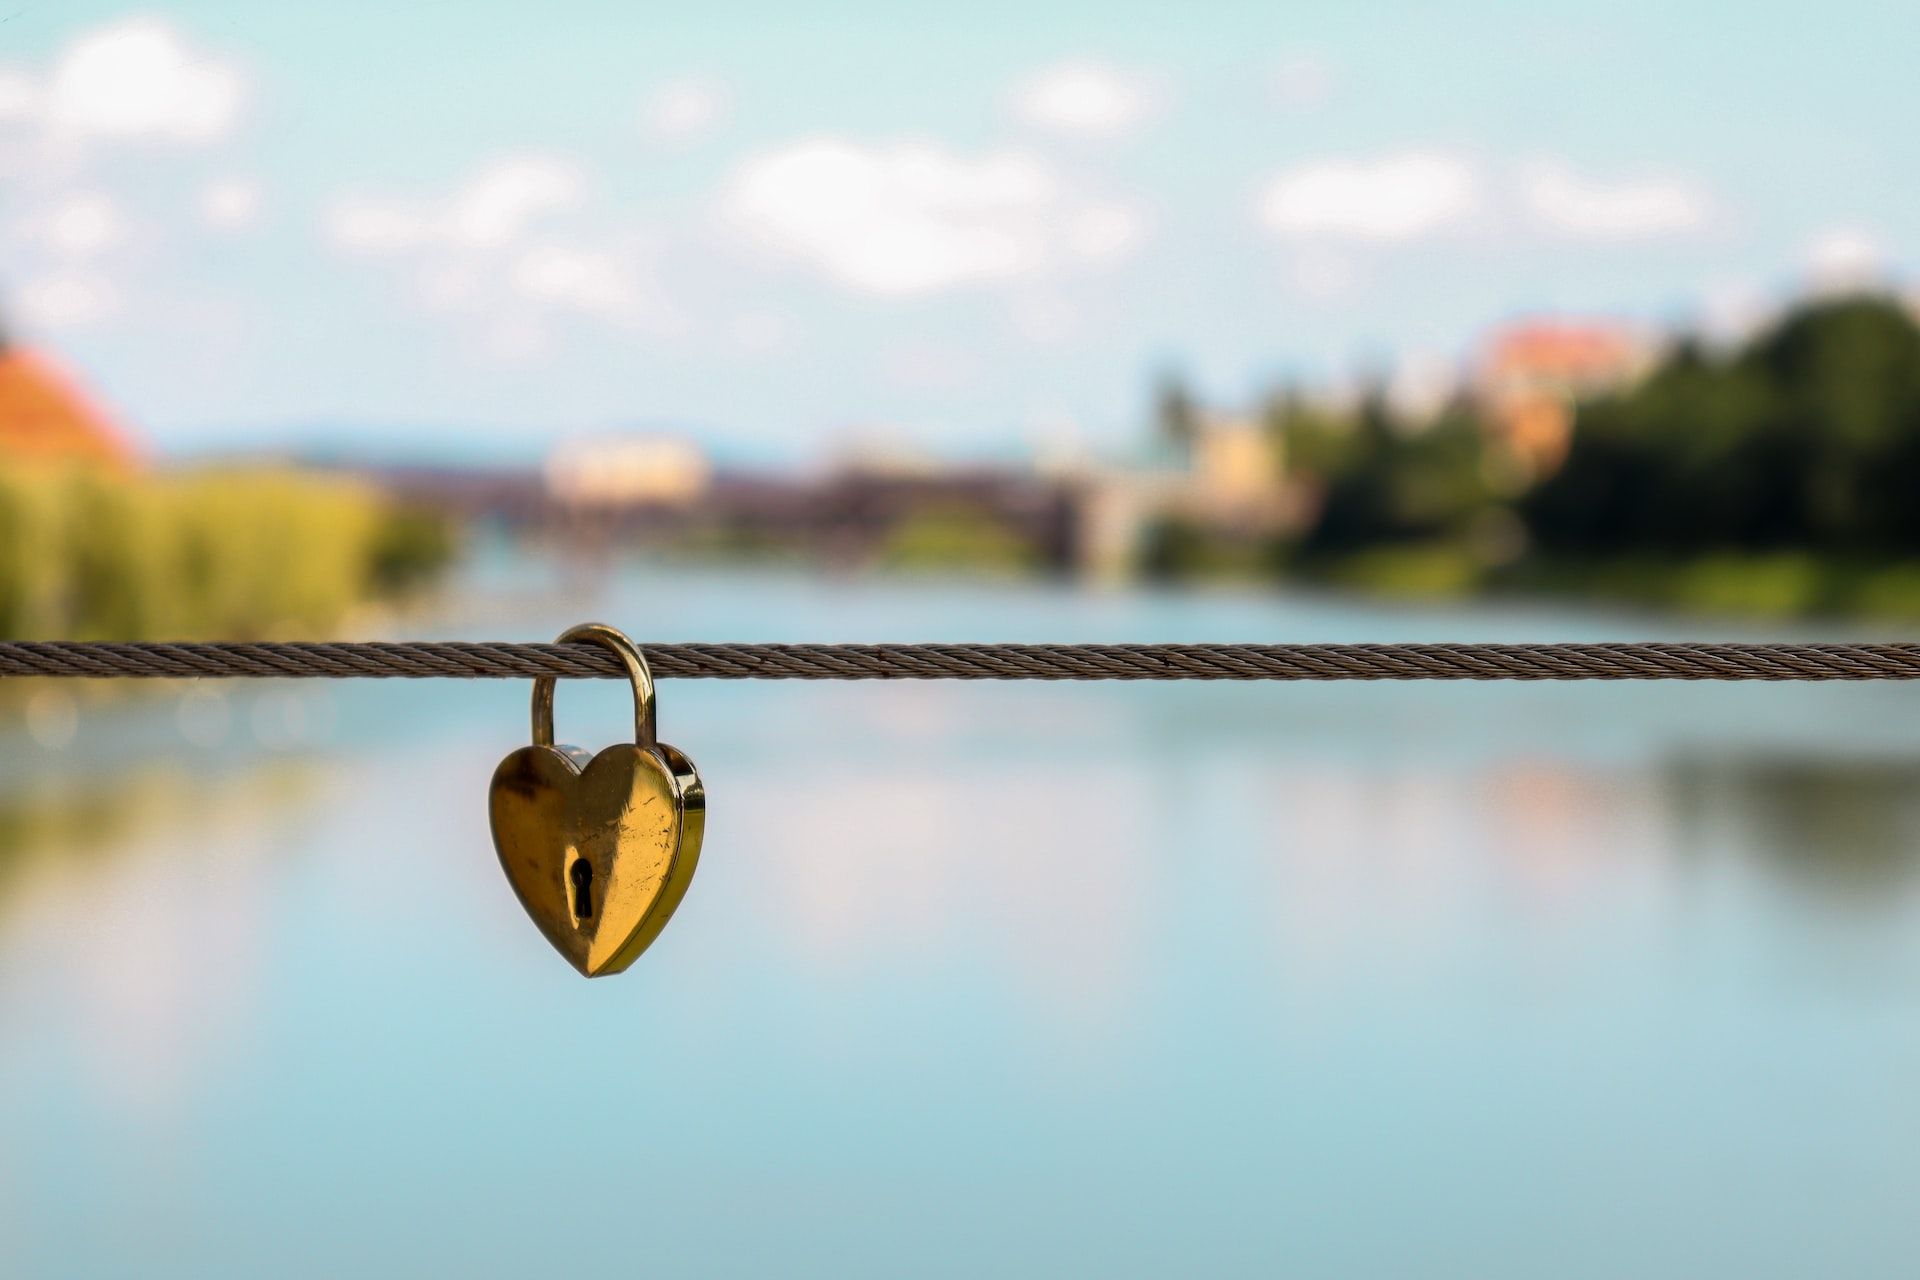 heart-shaped lock on a string against a blurred background of a river and blue skies